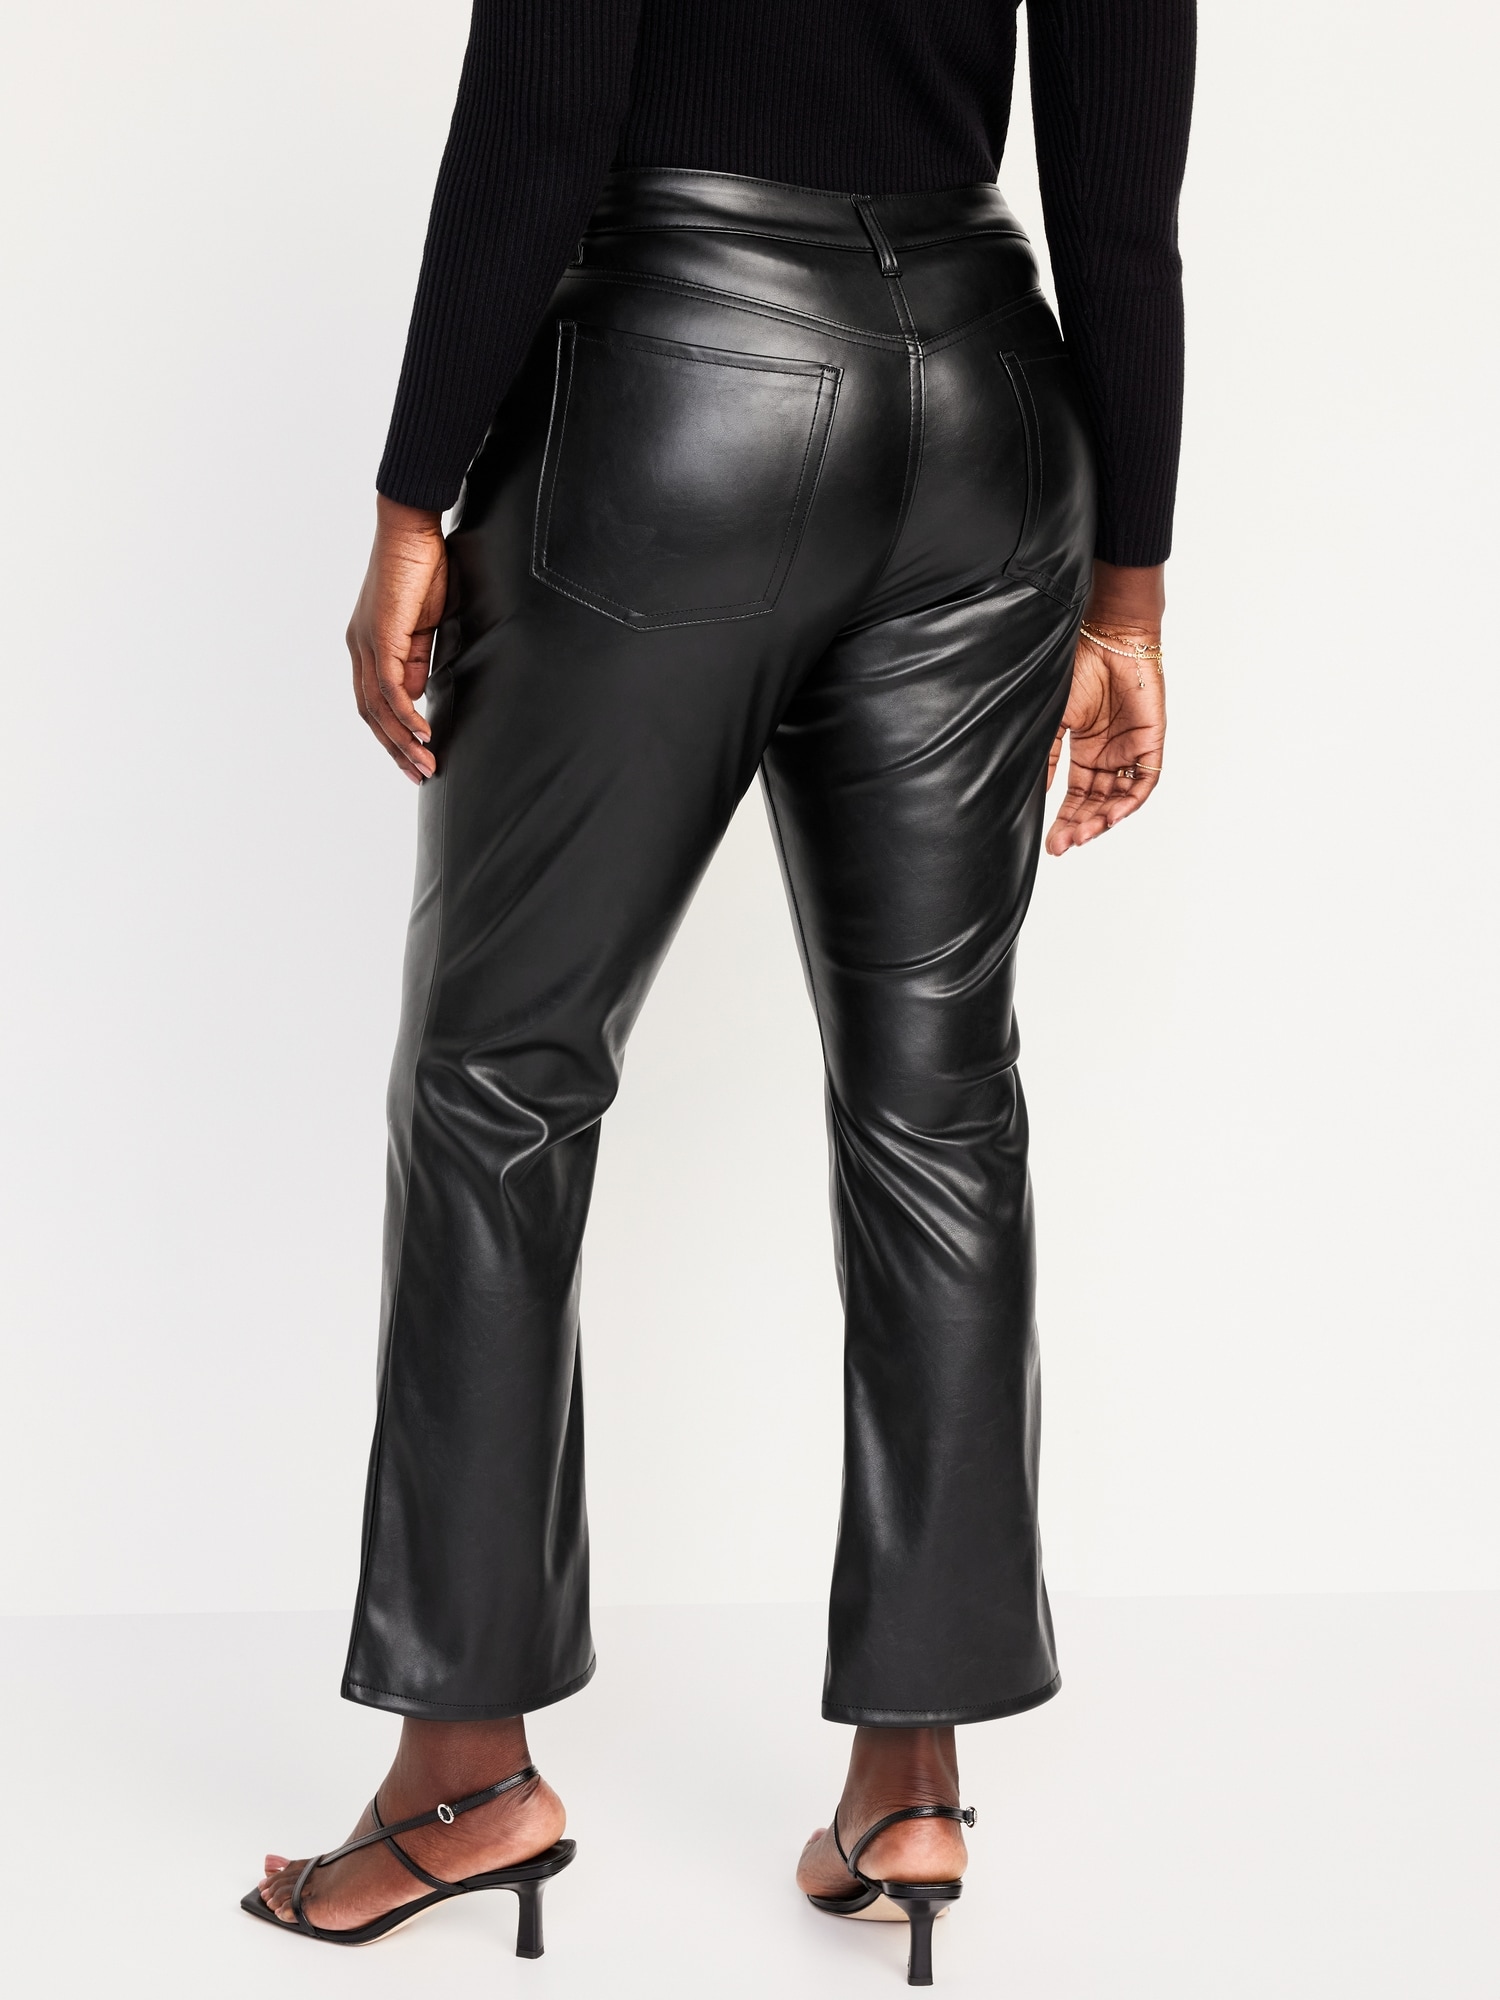 High-Waisted Faux-Leather Boot-Cut Ankle Pants